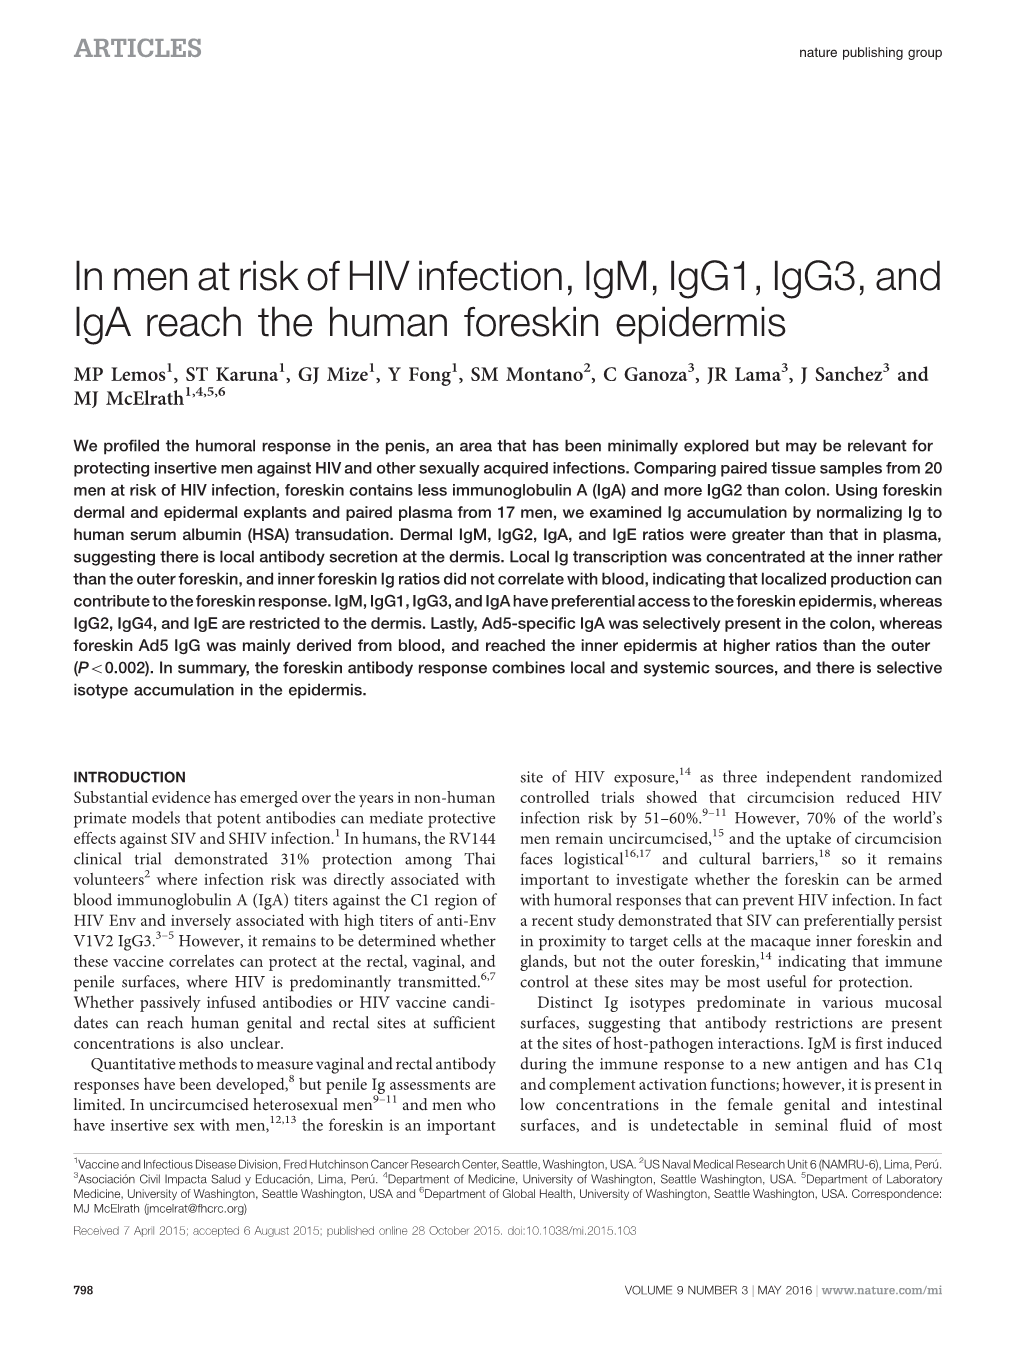 In Men at Risk of HIV Infection, Igm, Igg1, Igg3, and Iga Reach the Human Foreskin Epidermis